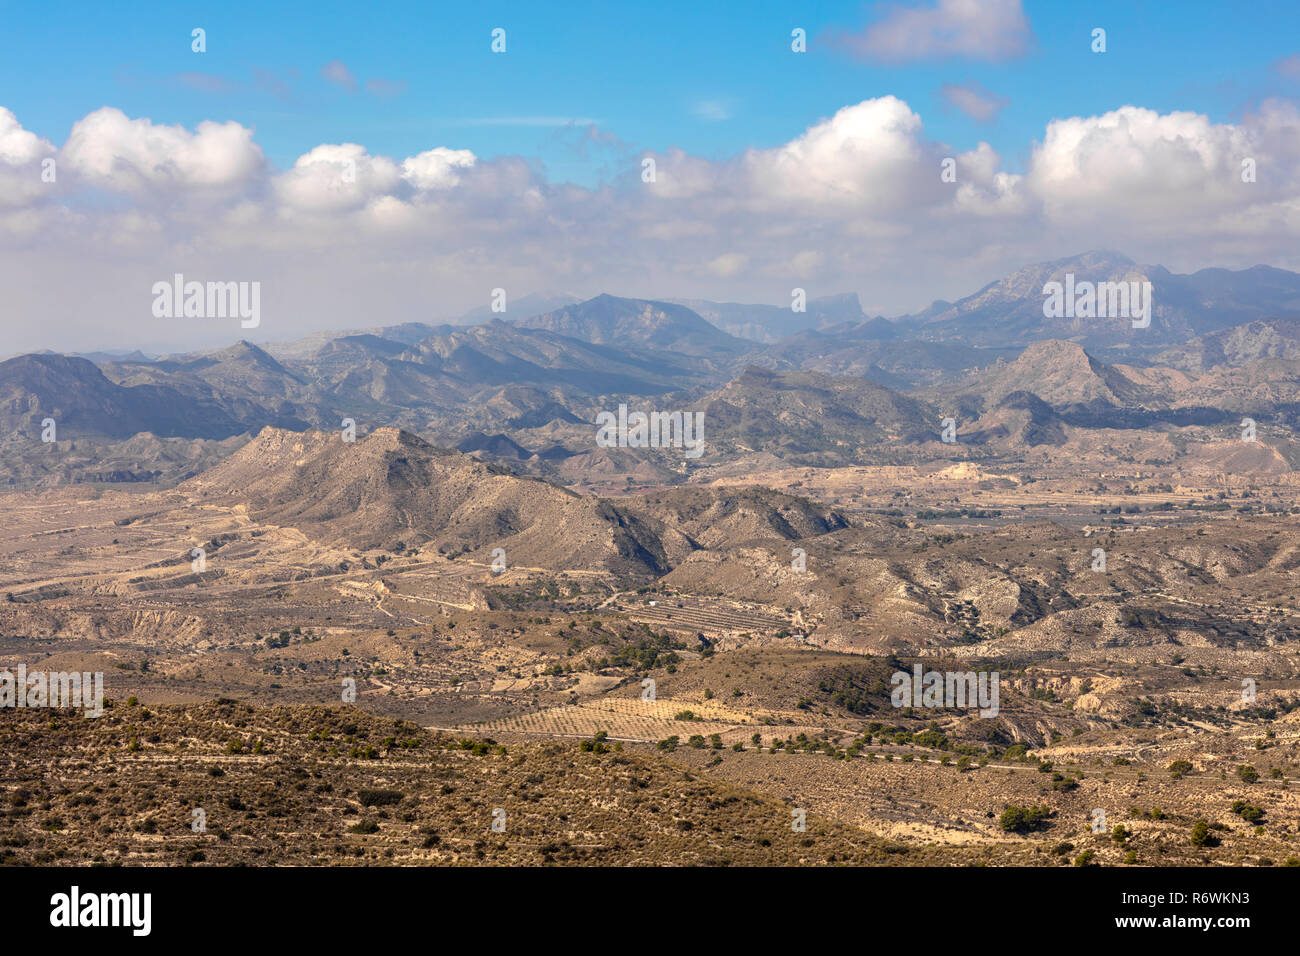 mountain landscape of alicante, mountains without vegetation and eroded under a blue sky Stock Photo